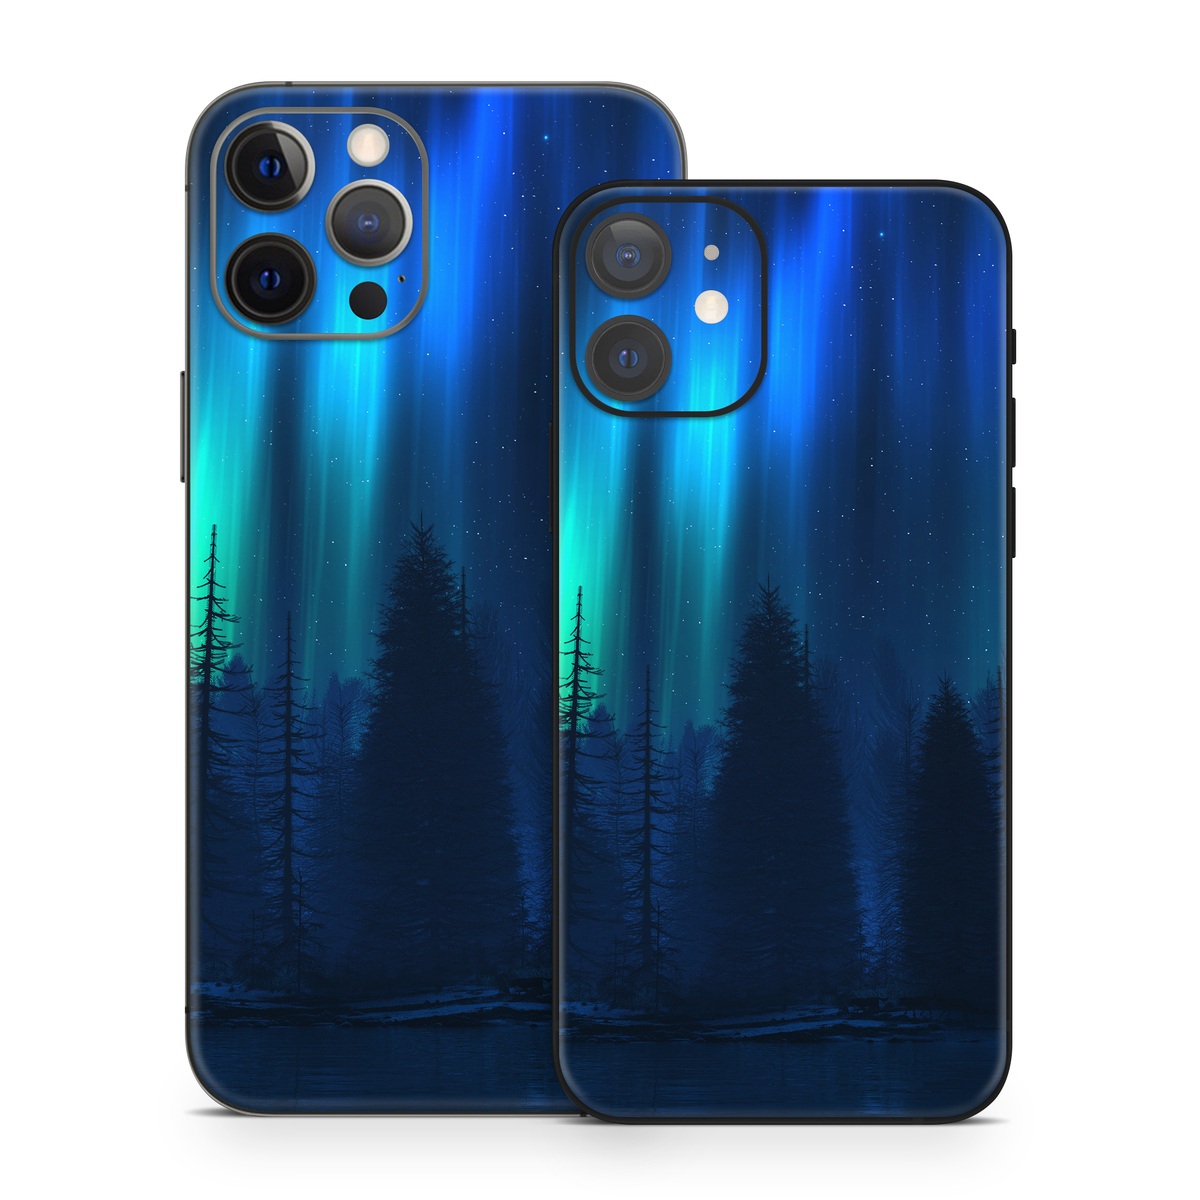 iPhone 12 Series Skin design of Blue, Light, Natural environment, Tree, Sky, Forest, Darkness, Aurora, Night, Electric blue, with black, blue colors